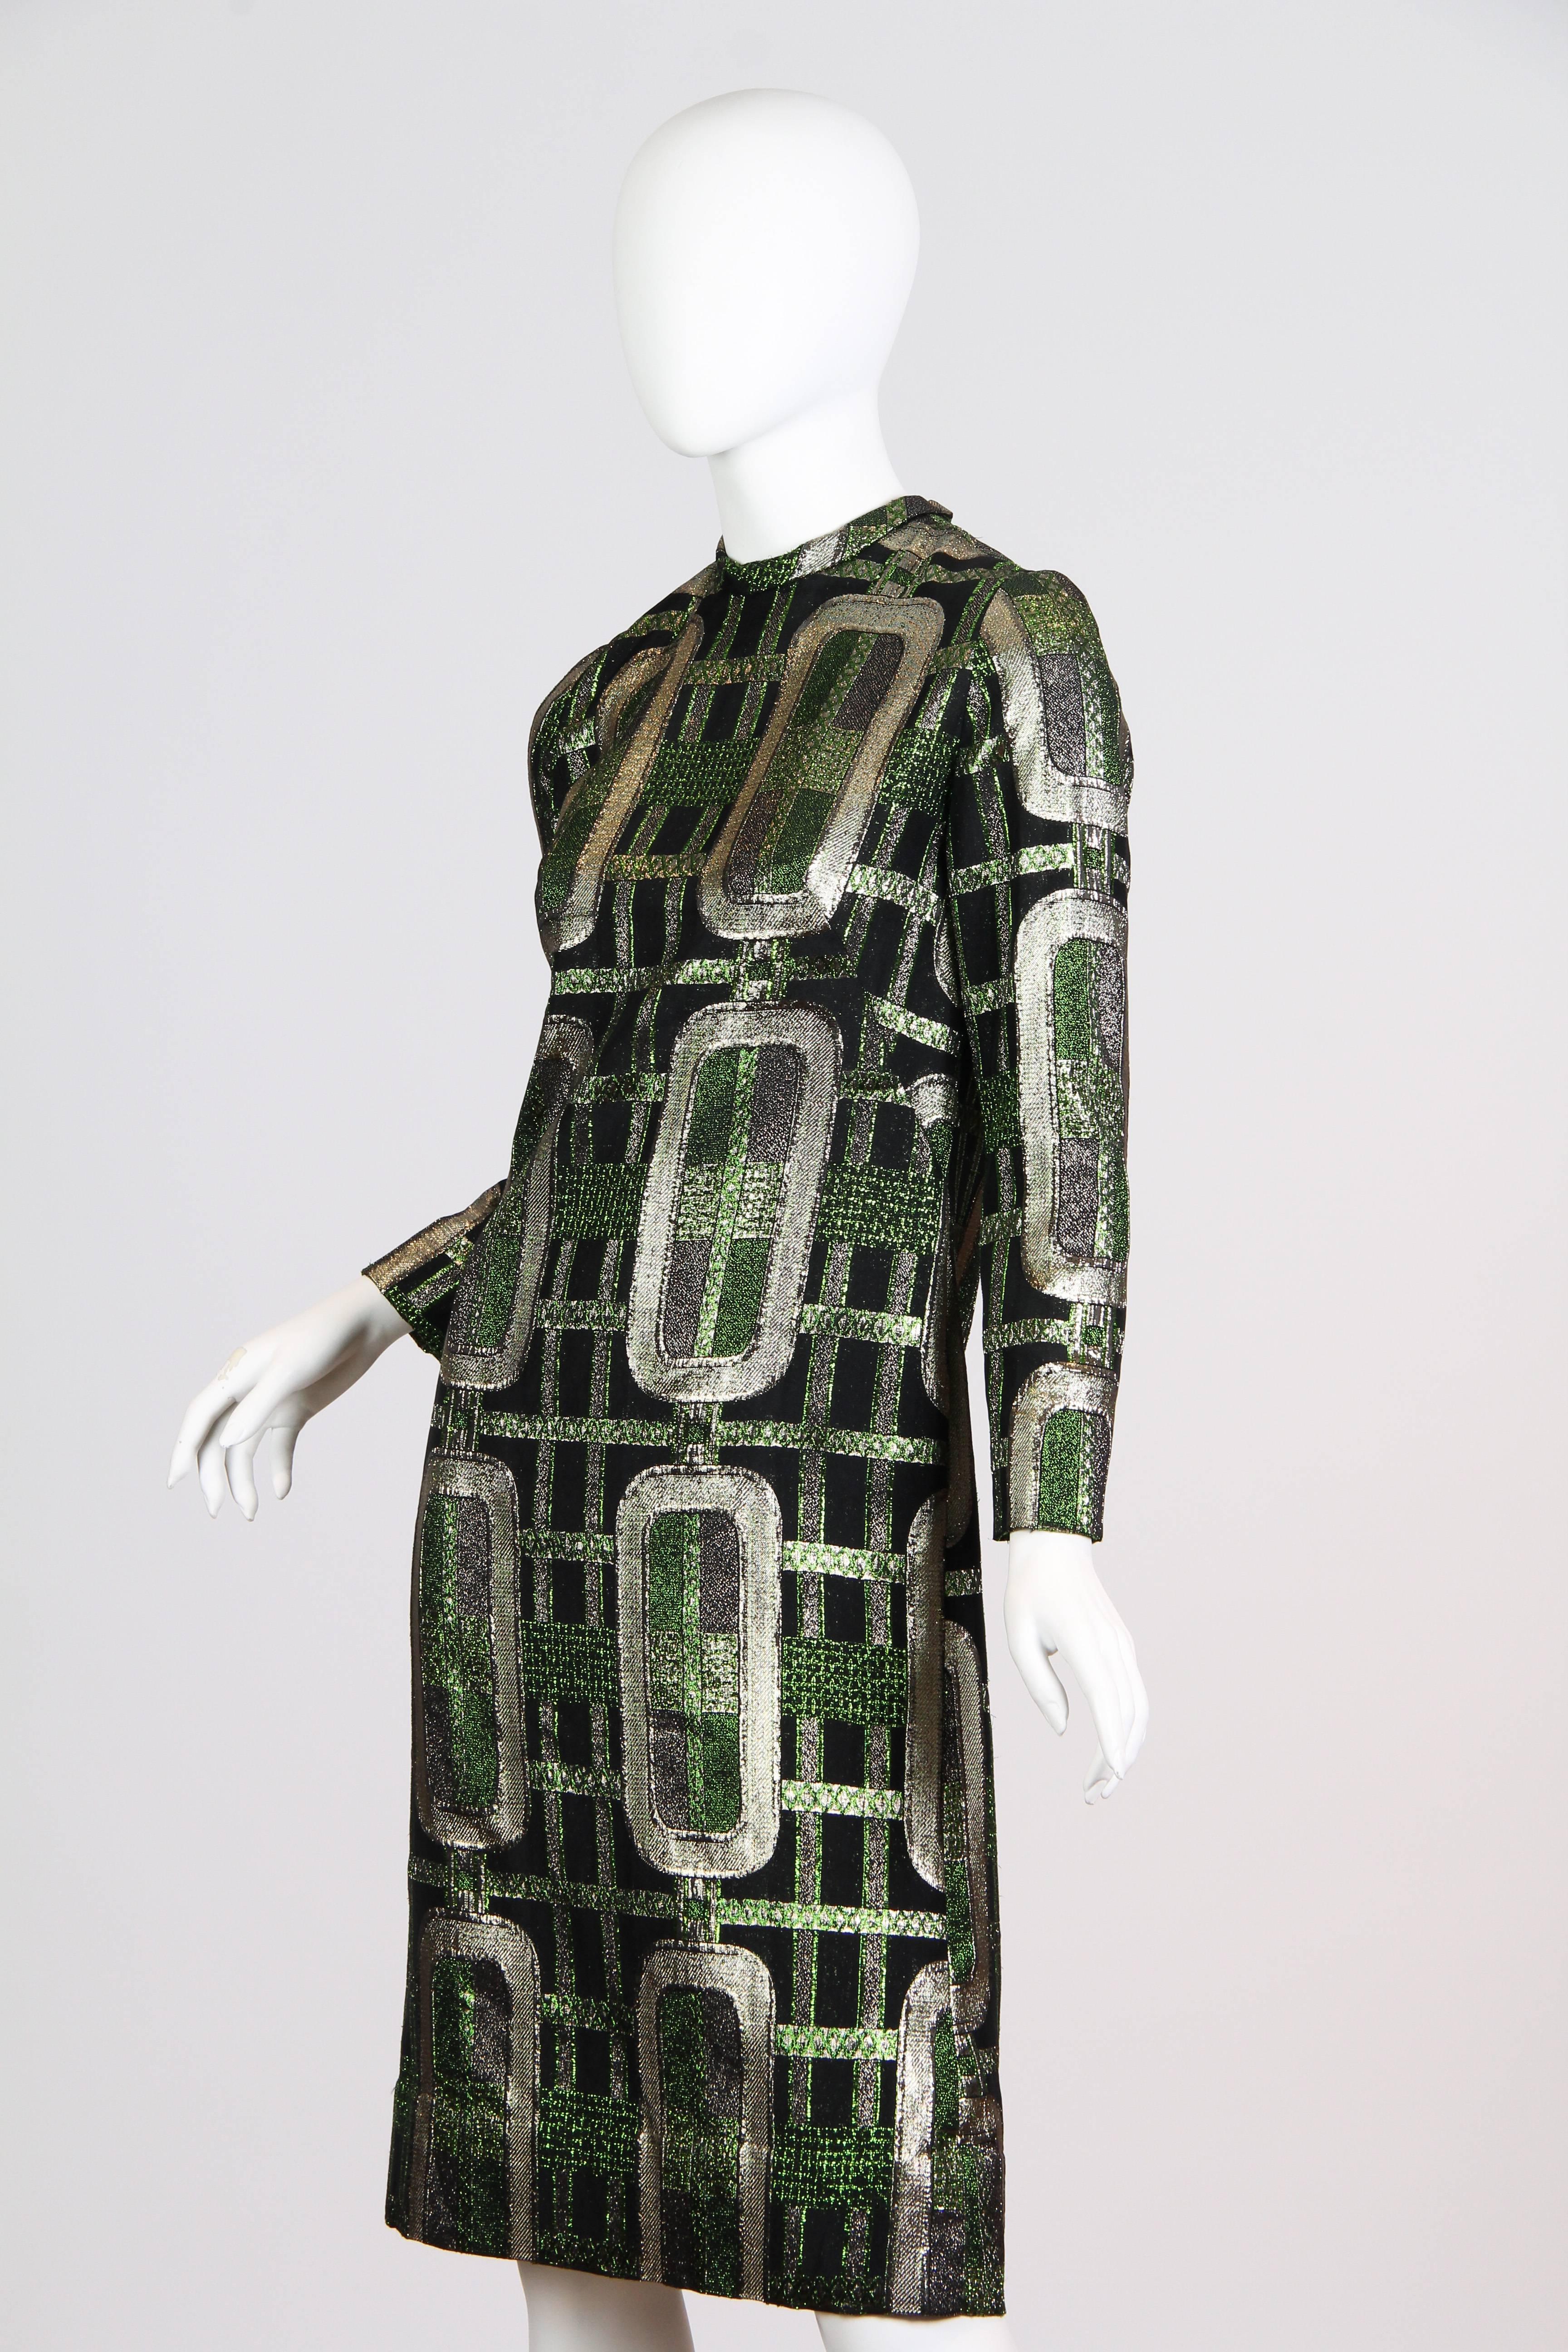 This is a sheath dress of metallic silver, green, and black brocade. Likely dating from the 1960s, the dress is made of a luxurious textured weave in shimmering metallic fibers. The geometric pattern is made of a grid overlaid with chain-like silver